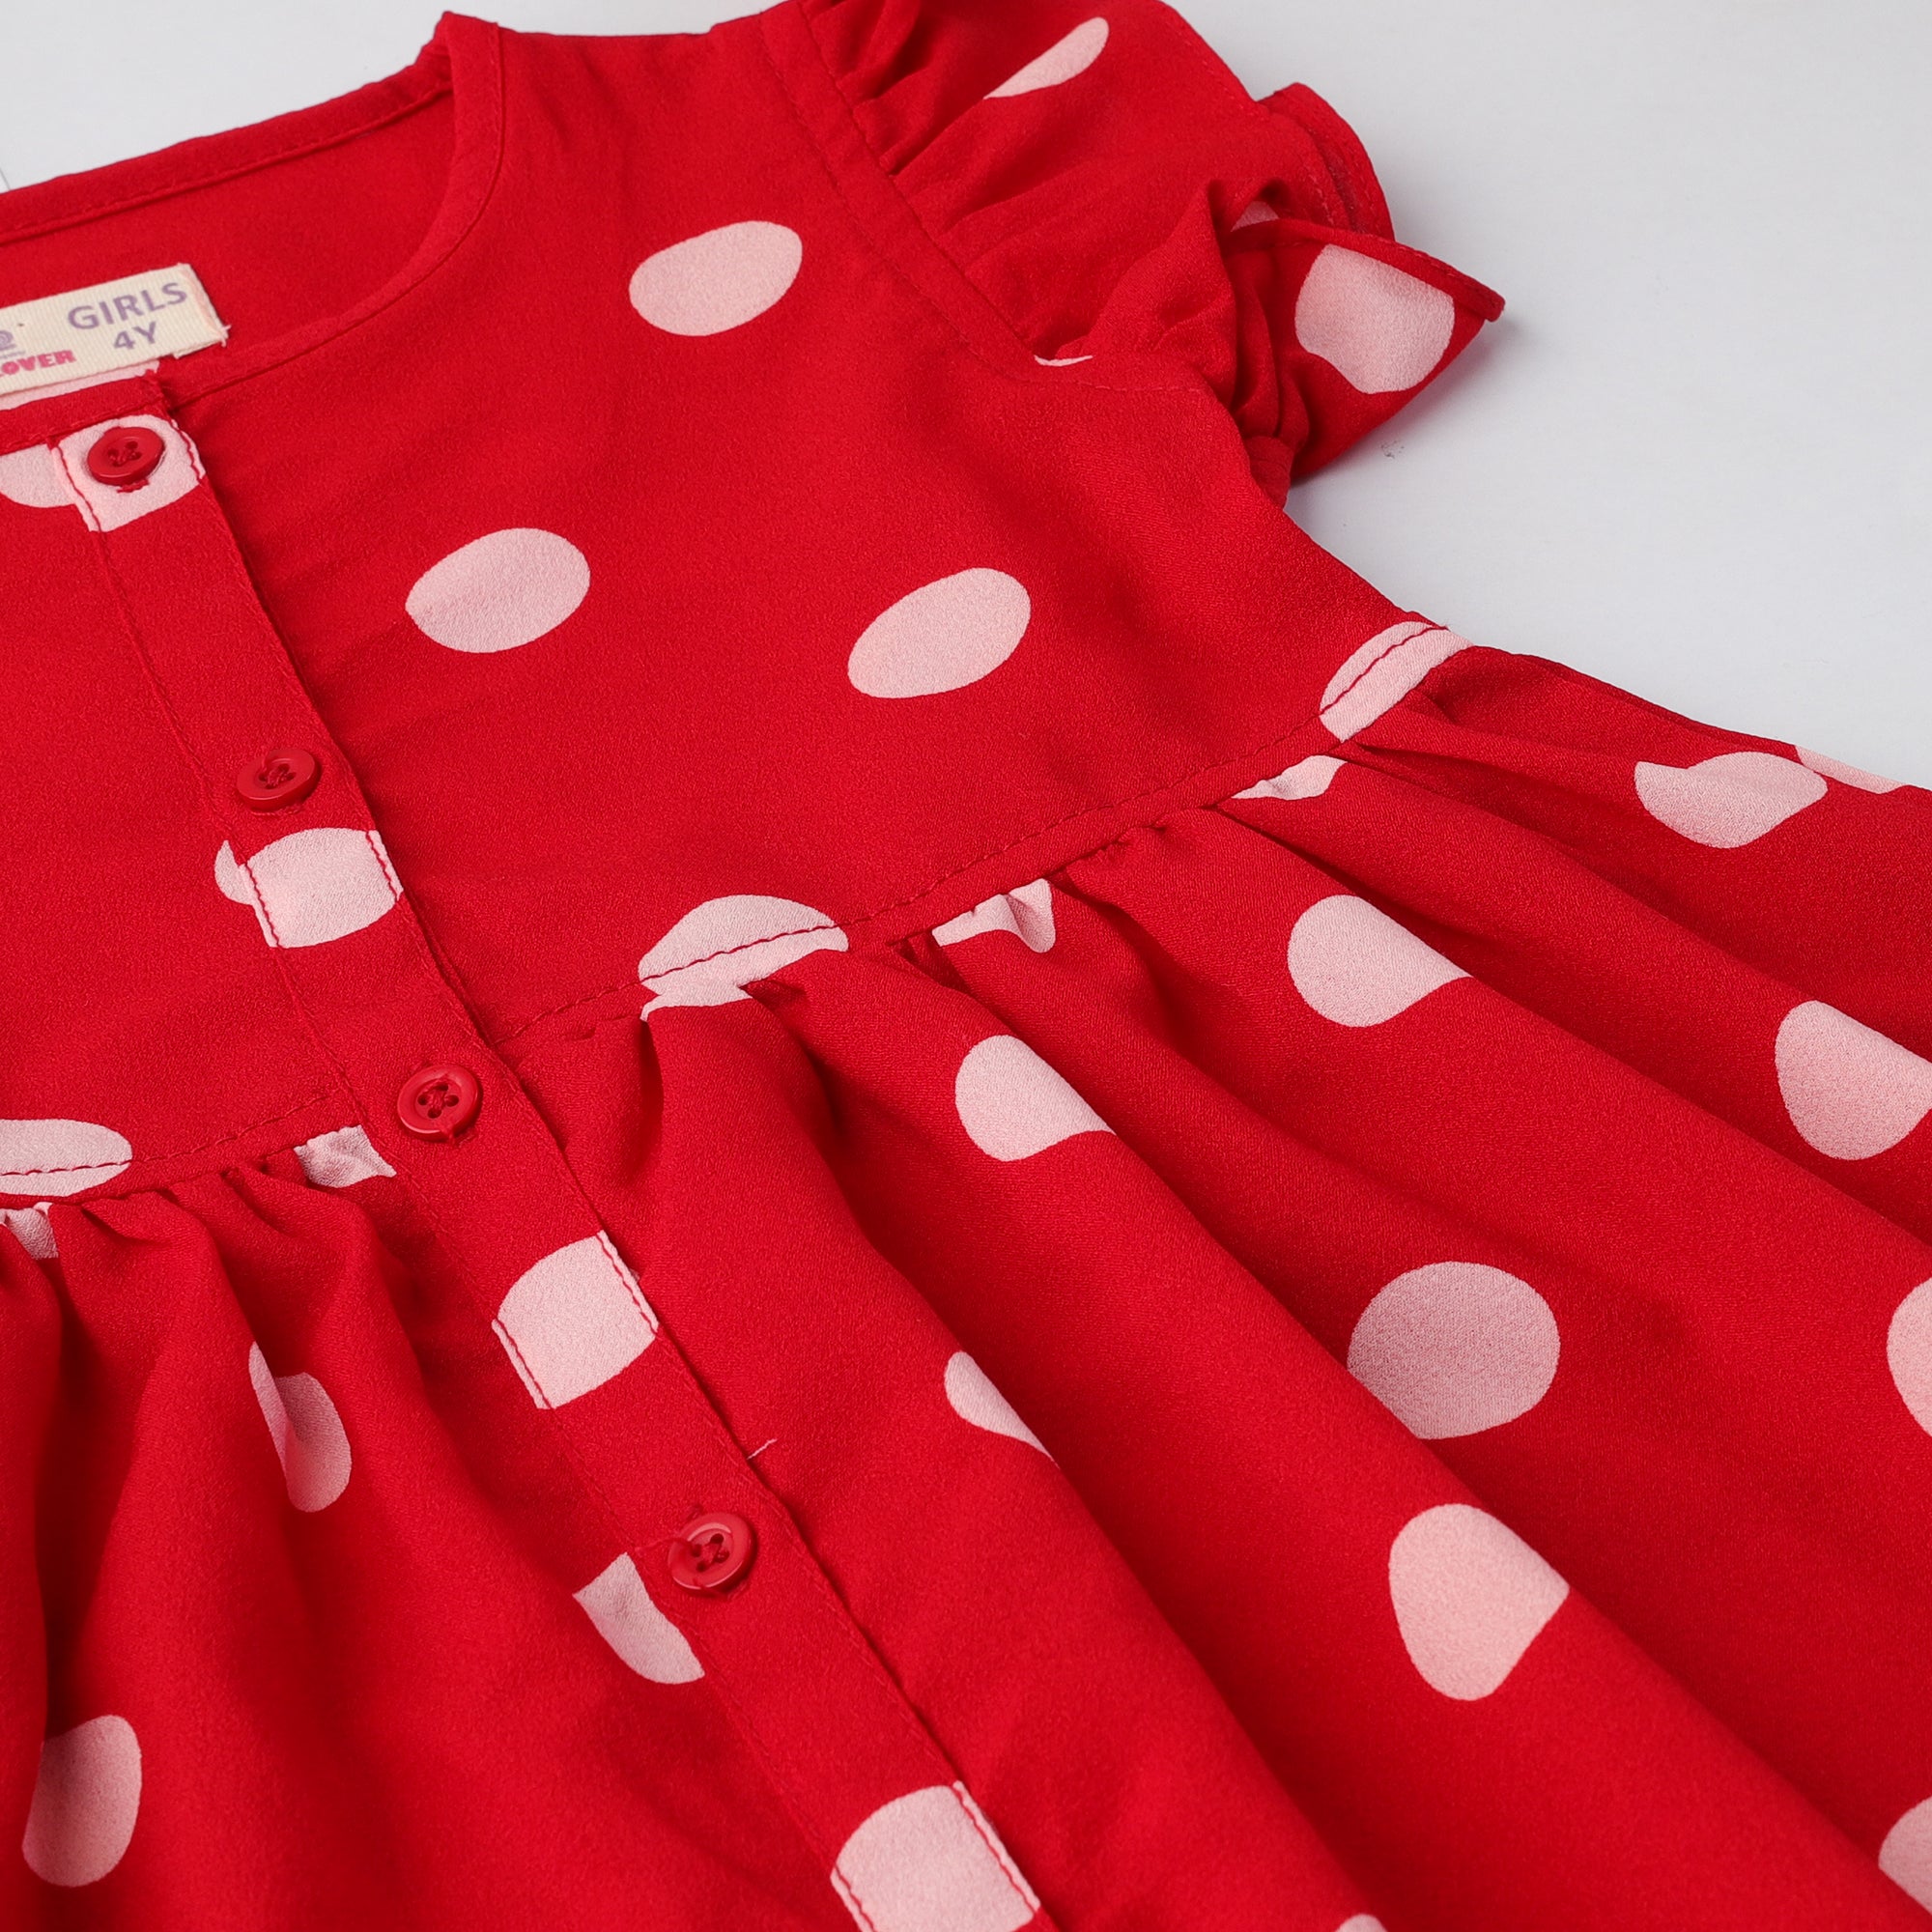 Girls Red Frock with White Polka Dots